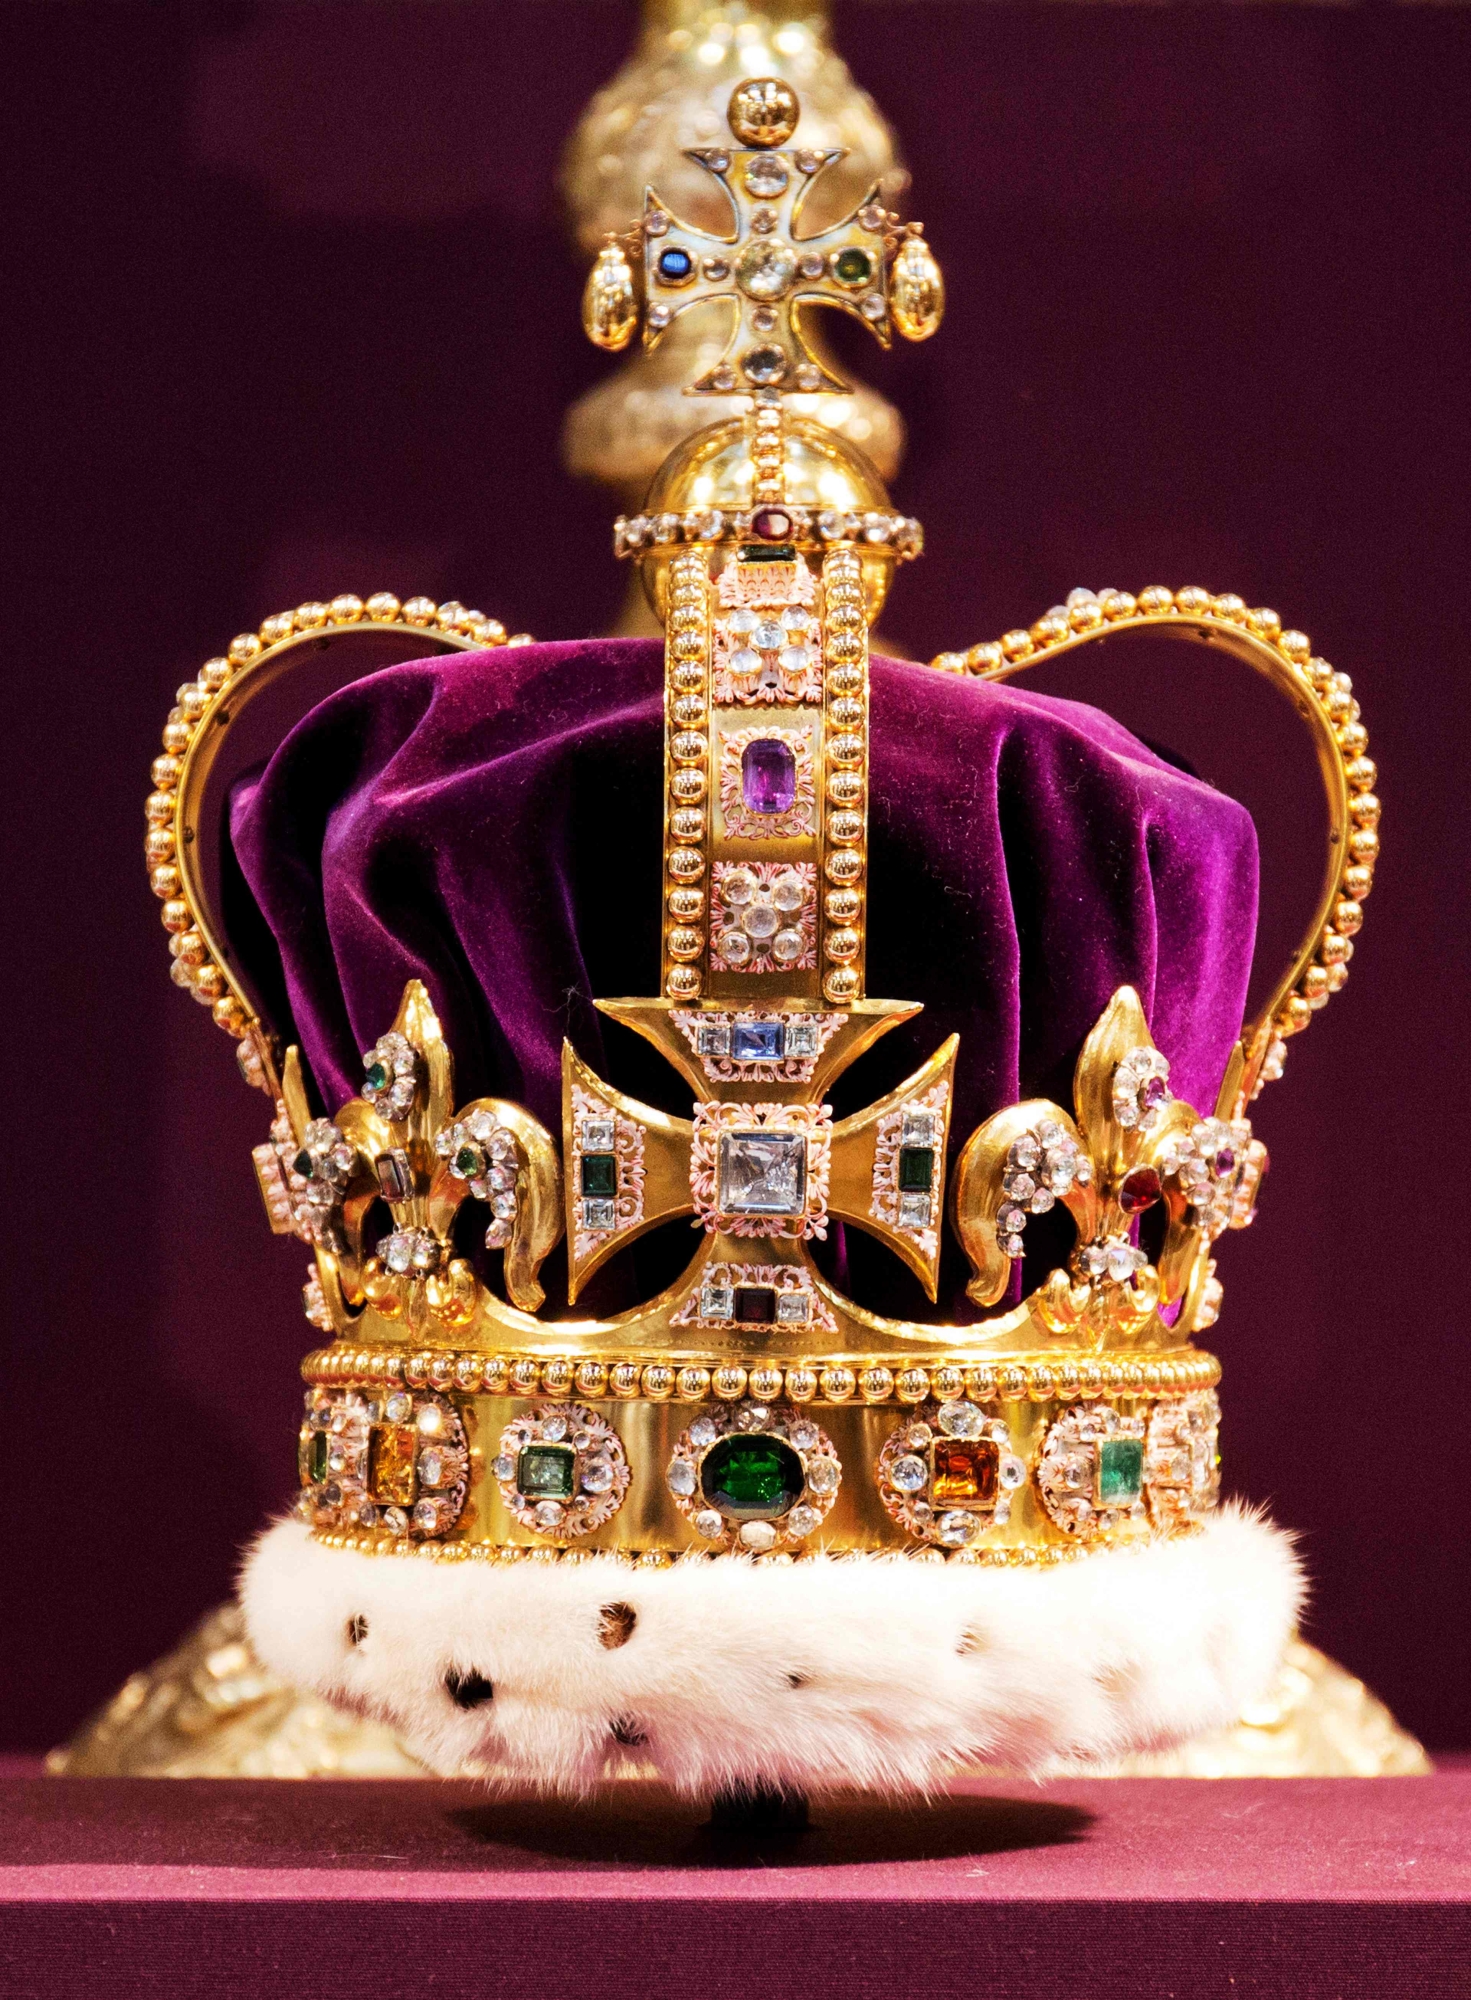 (FILES) A file photo taken on June 4, 2013 shows St Edward's Crown, the crown used in coronations for English and later British monarchs, and one of the senior Crown Jewels of Britain, during a service to celebrate the 60th anniversary of the coronation of Queen Elizabeth II at Westminster Abbey in London. - The coronation of King Charles III will take place on May 6, 2023, Buckingham Palace announced on October 11, 2022. The Crown Jewels will form the centrepiece of King Charles III's coronation, and symbolise the power and history of the British monarchy. (Photo by JACK HILL / POOL / AFP)